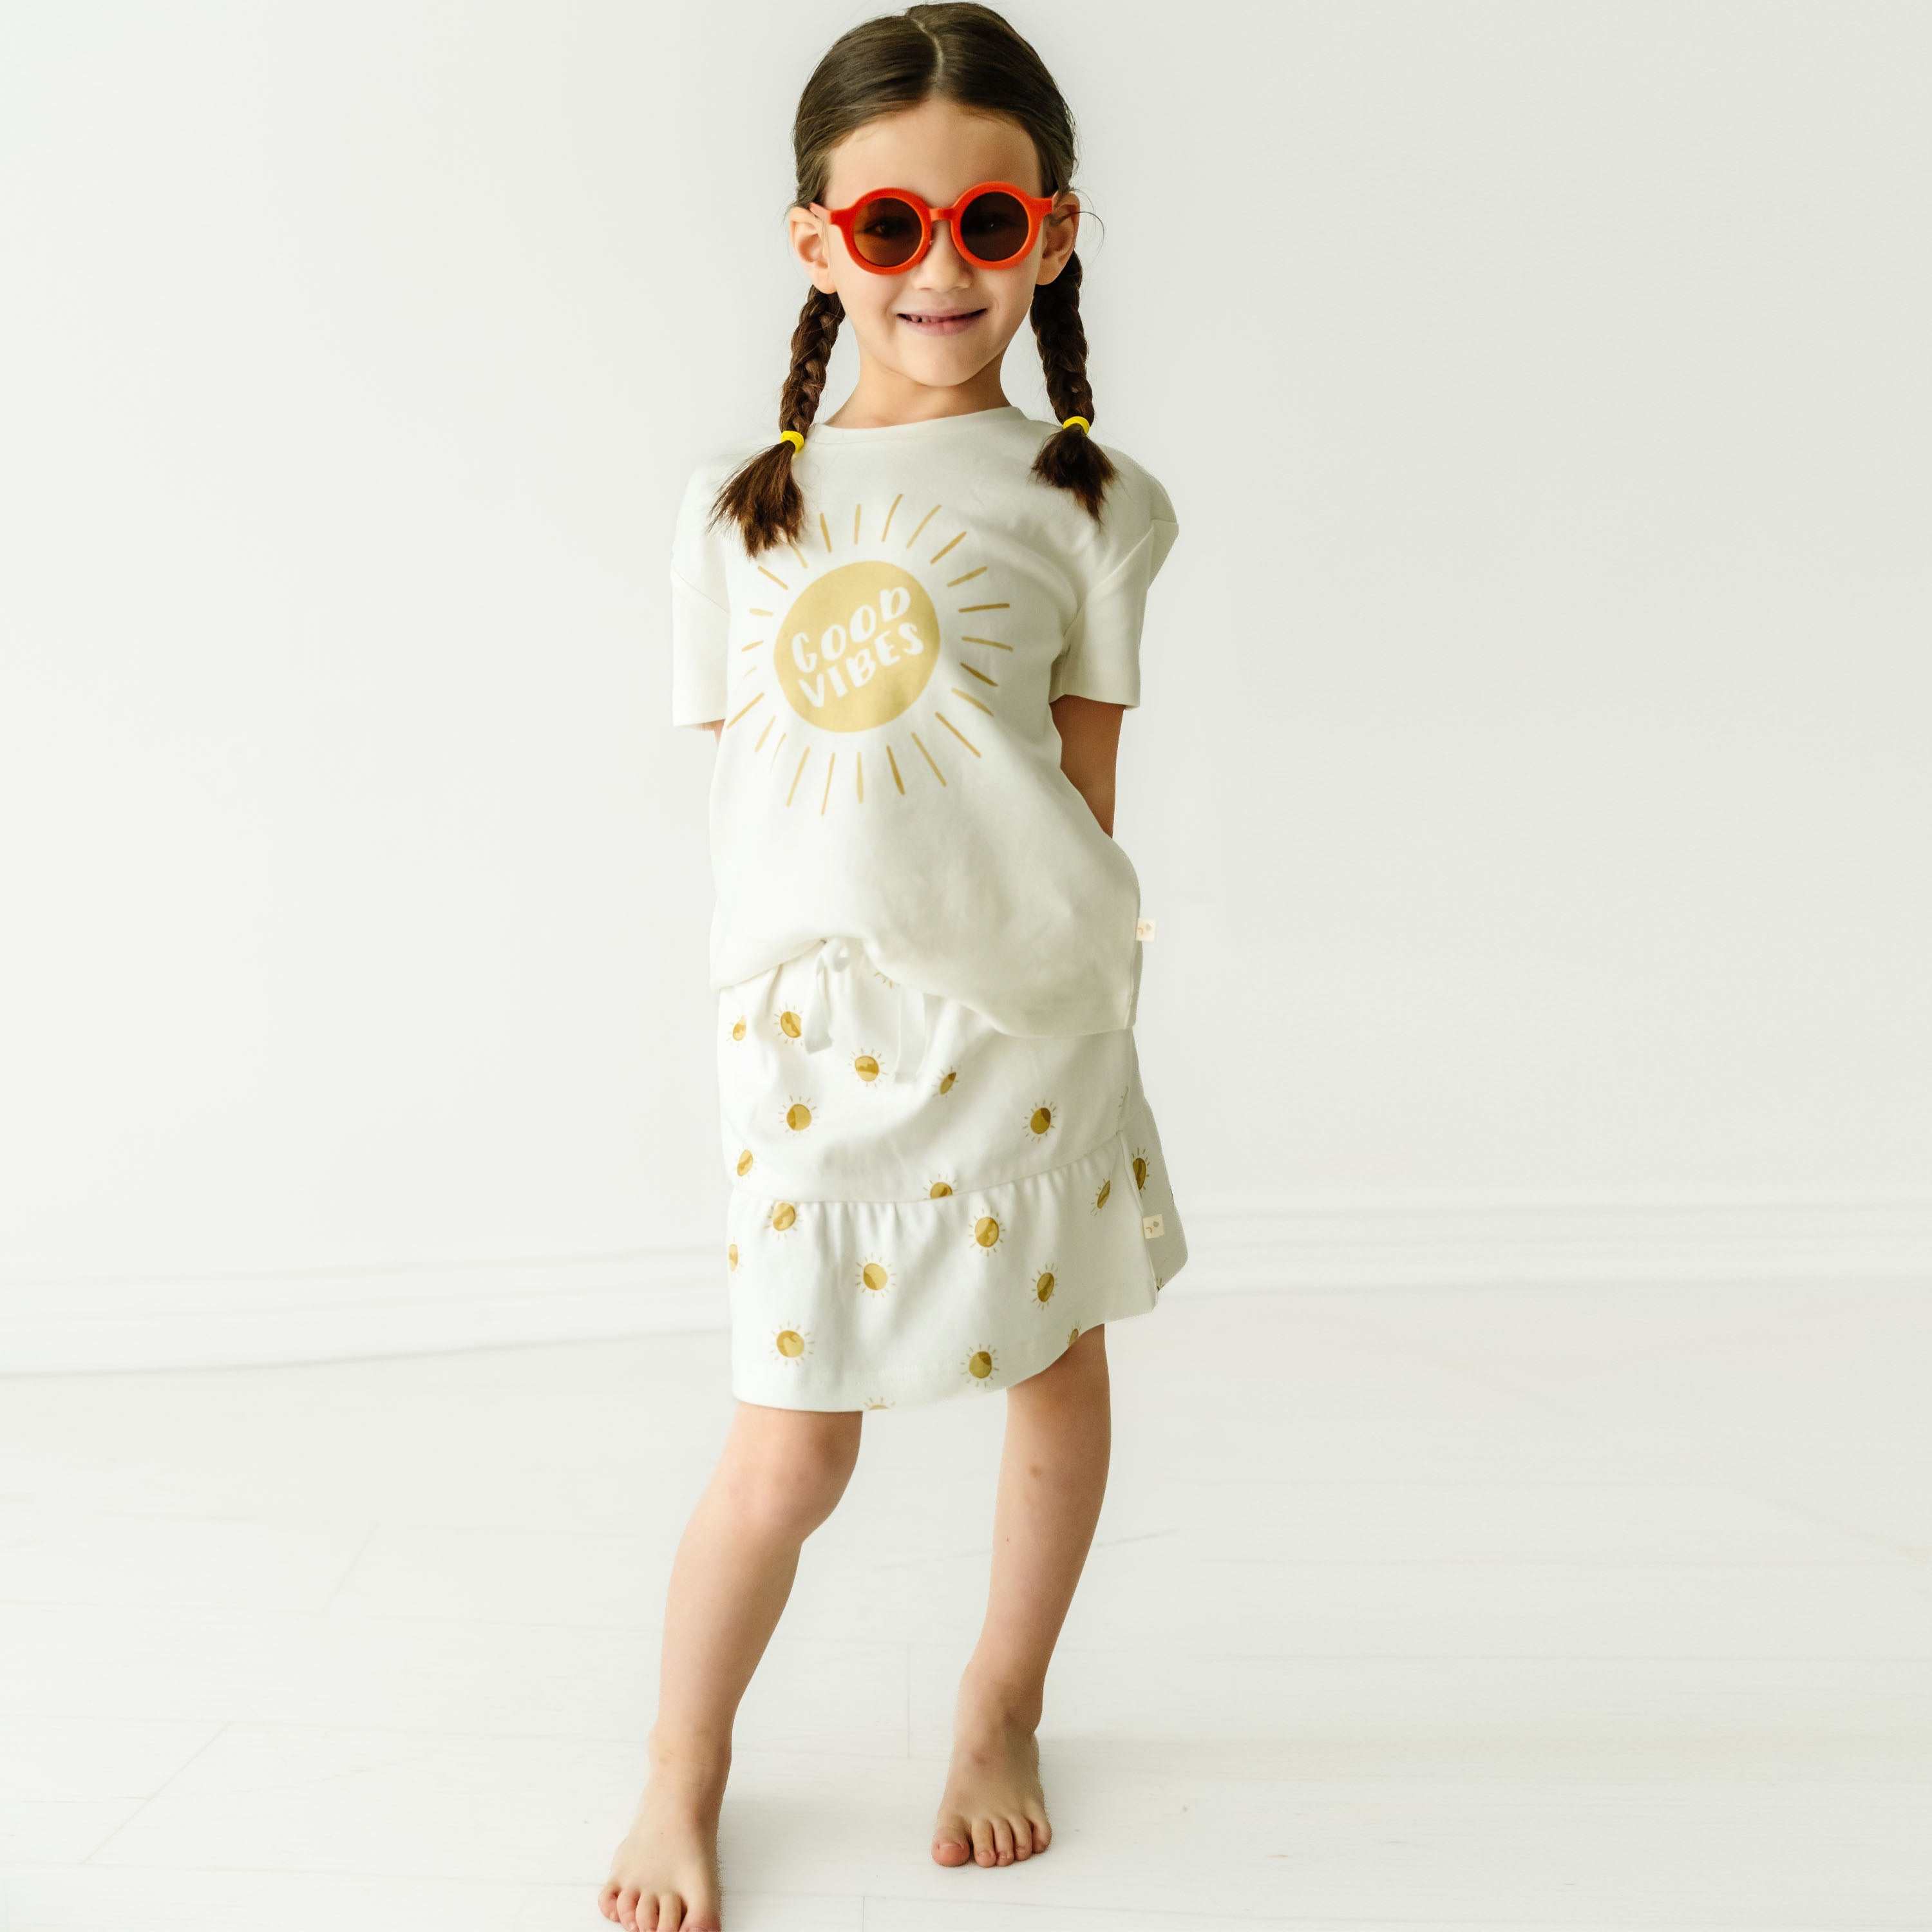 A young toddler with braided hair, wearing a Makemake Organics Boxy Tee and Skort Set - Sunshine, stands smiling in sunglasses against a plain background.